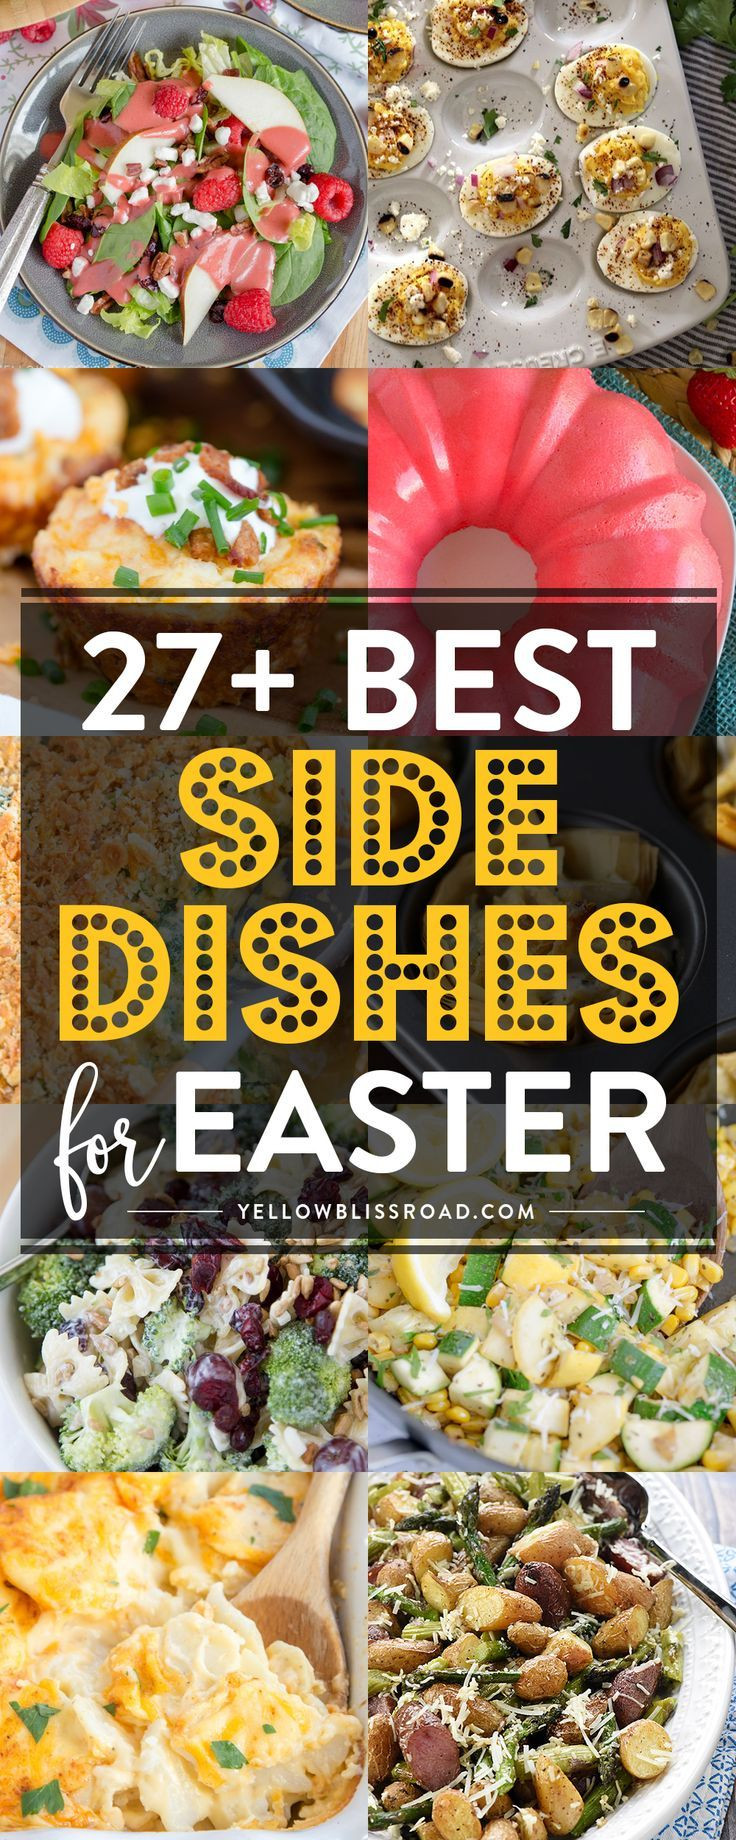 Easter Dinner Side Dish Ideas
 25 best ideas about Easter Dishes on Pinterest